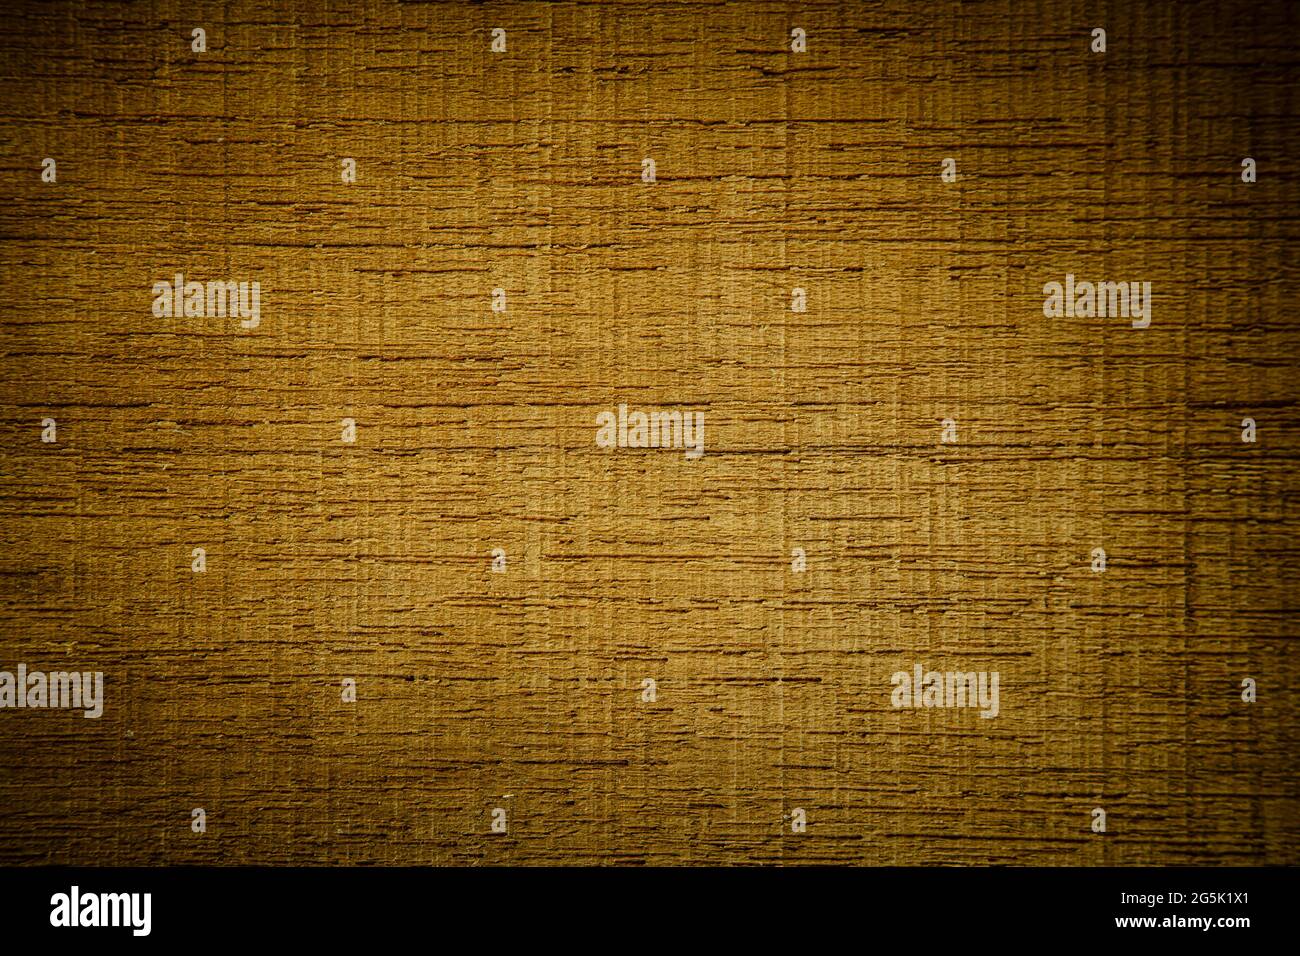 Wood texture with vignette background Stock Photo